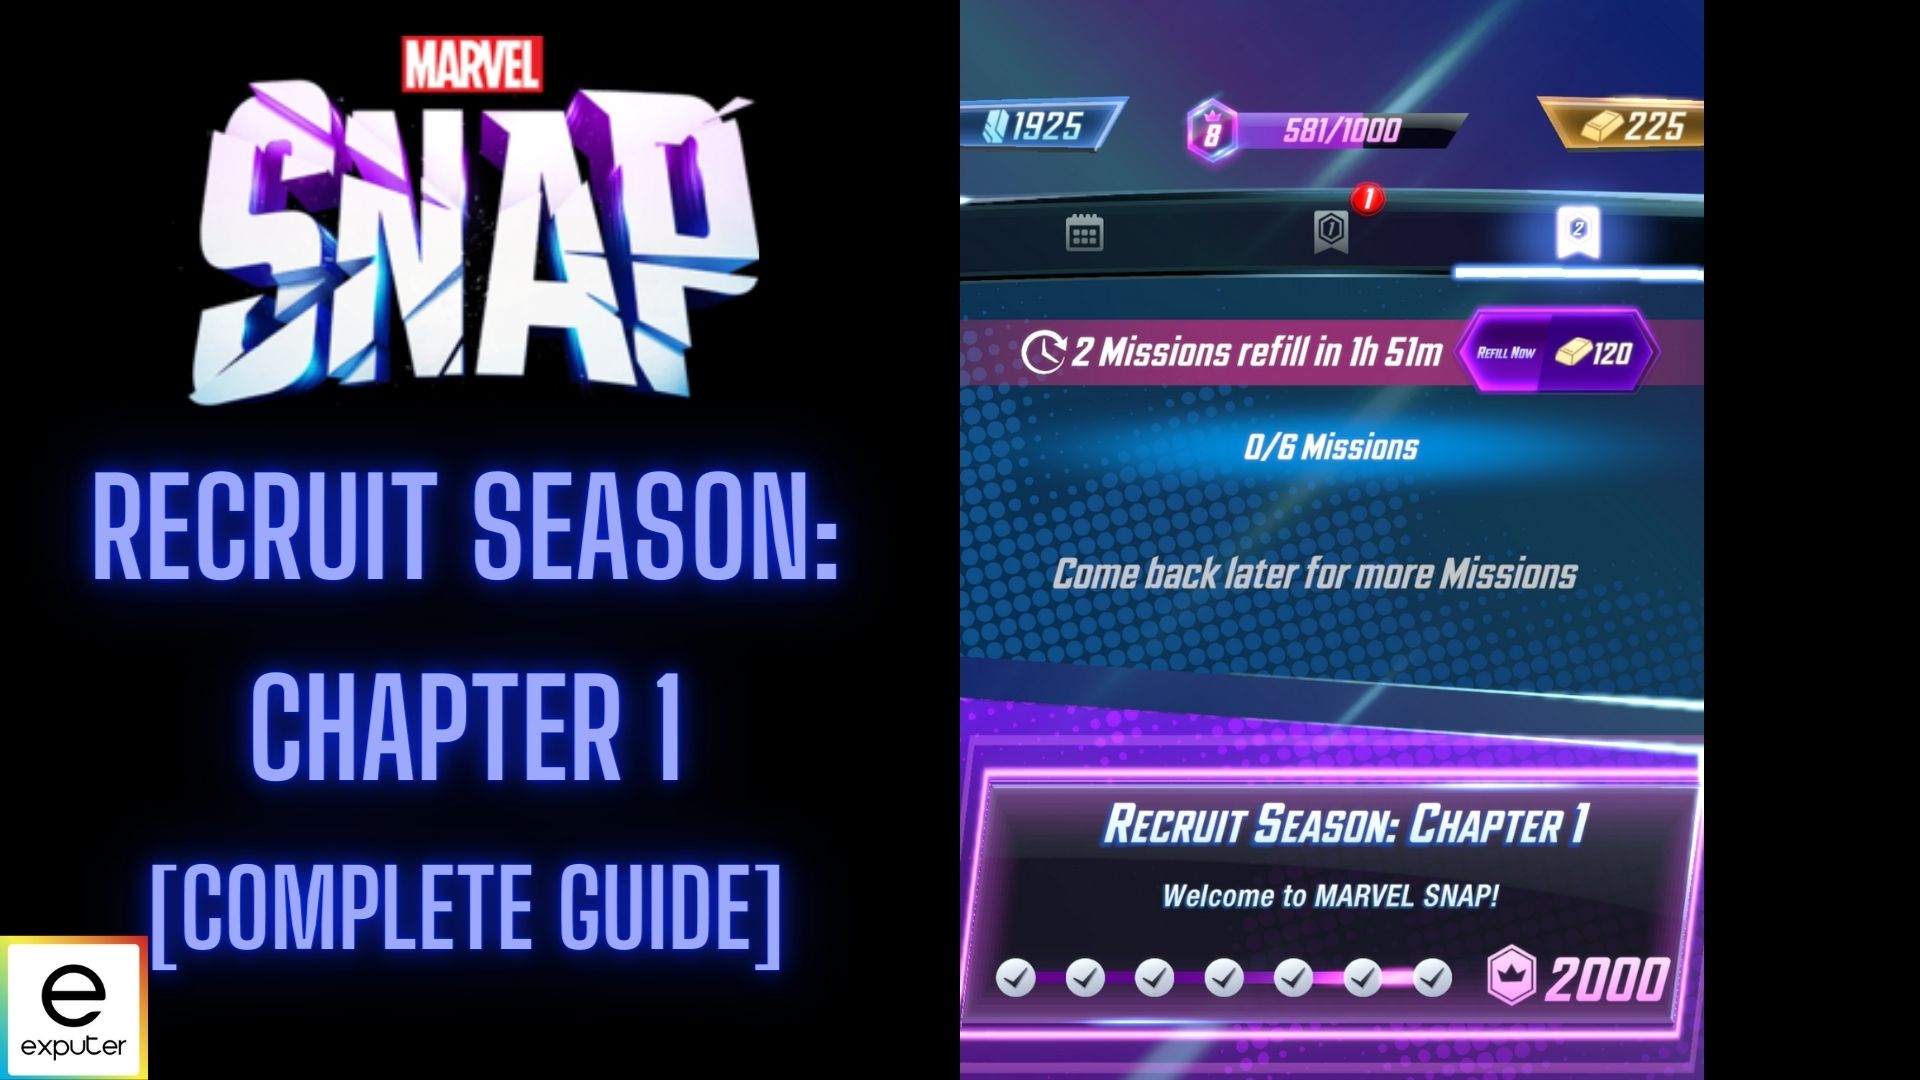 How to complete Recruit season chapter 1 missions in marvel snap